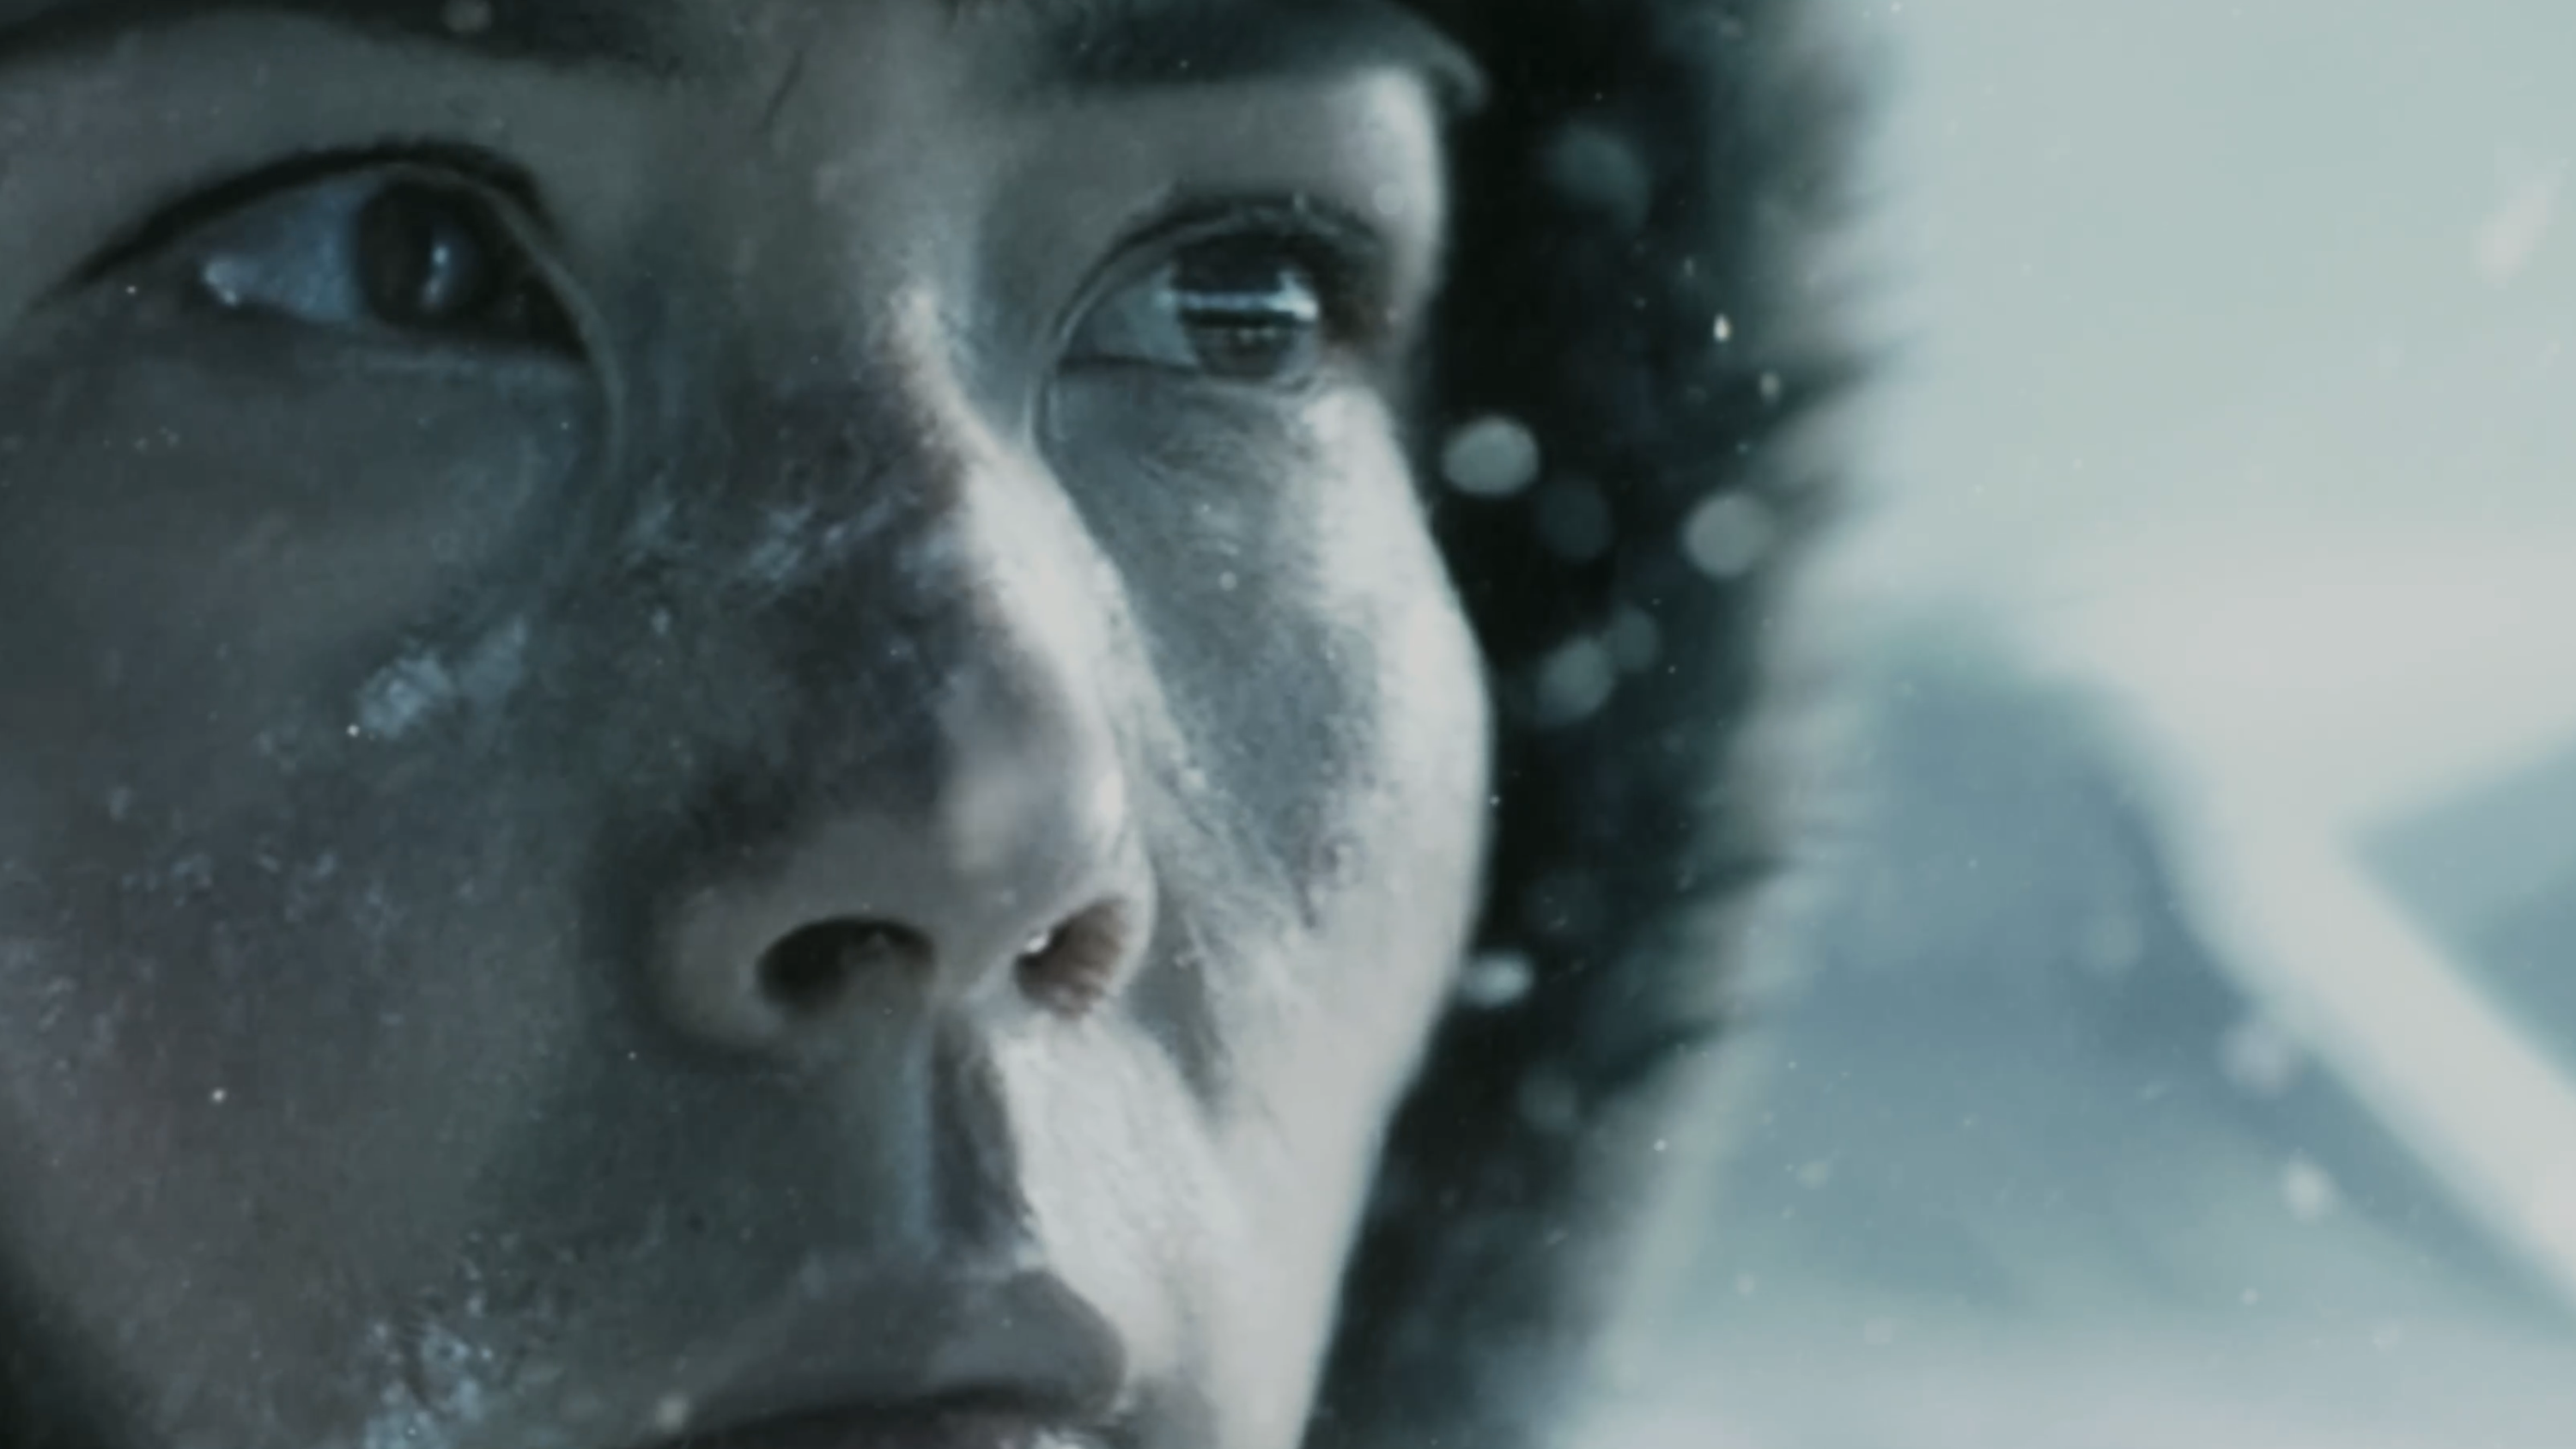 screencap from The Frost of an extreme closeup on a person's face looking into the snowy distance from within a fur hood